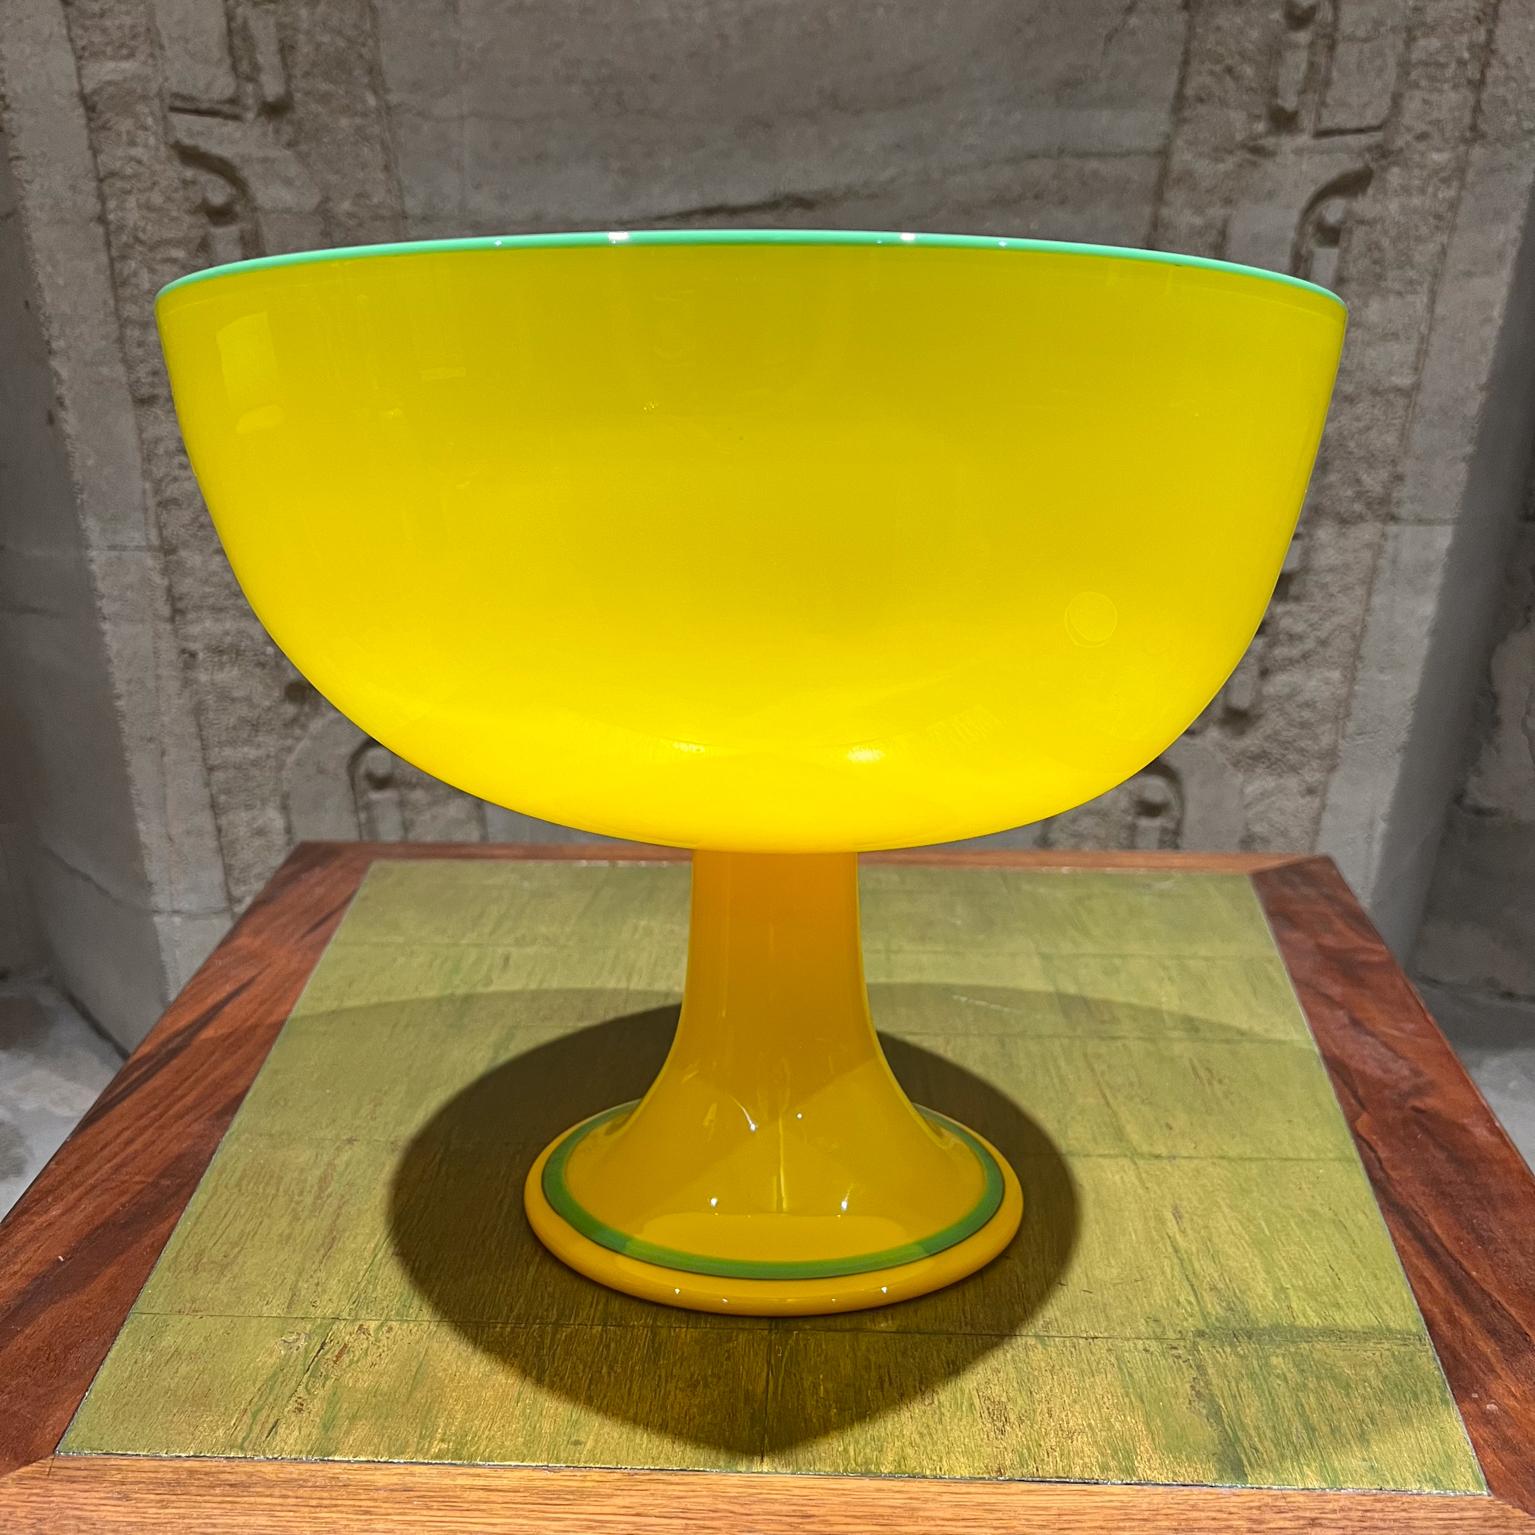 
AMBIANIC presents

Modern Czech Art Tango Glass Yellow & Green Pedestal Art Bowl 
in the style of Michael Powolny Bohemian Loetz Glass
Unmarked.
Oversize
11.38 h x 13.75 diameter
Preowned original vintage condition. High quality display.
Refer to